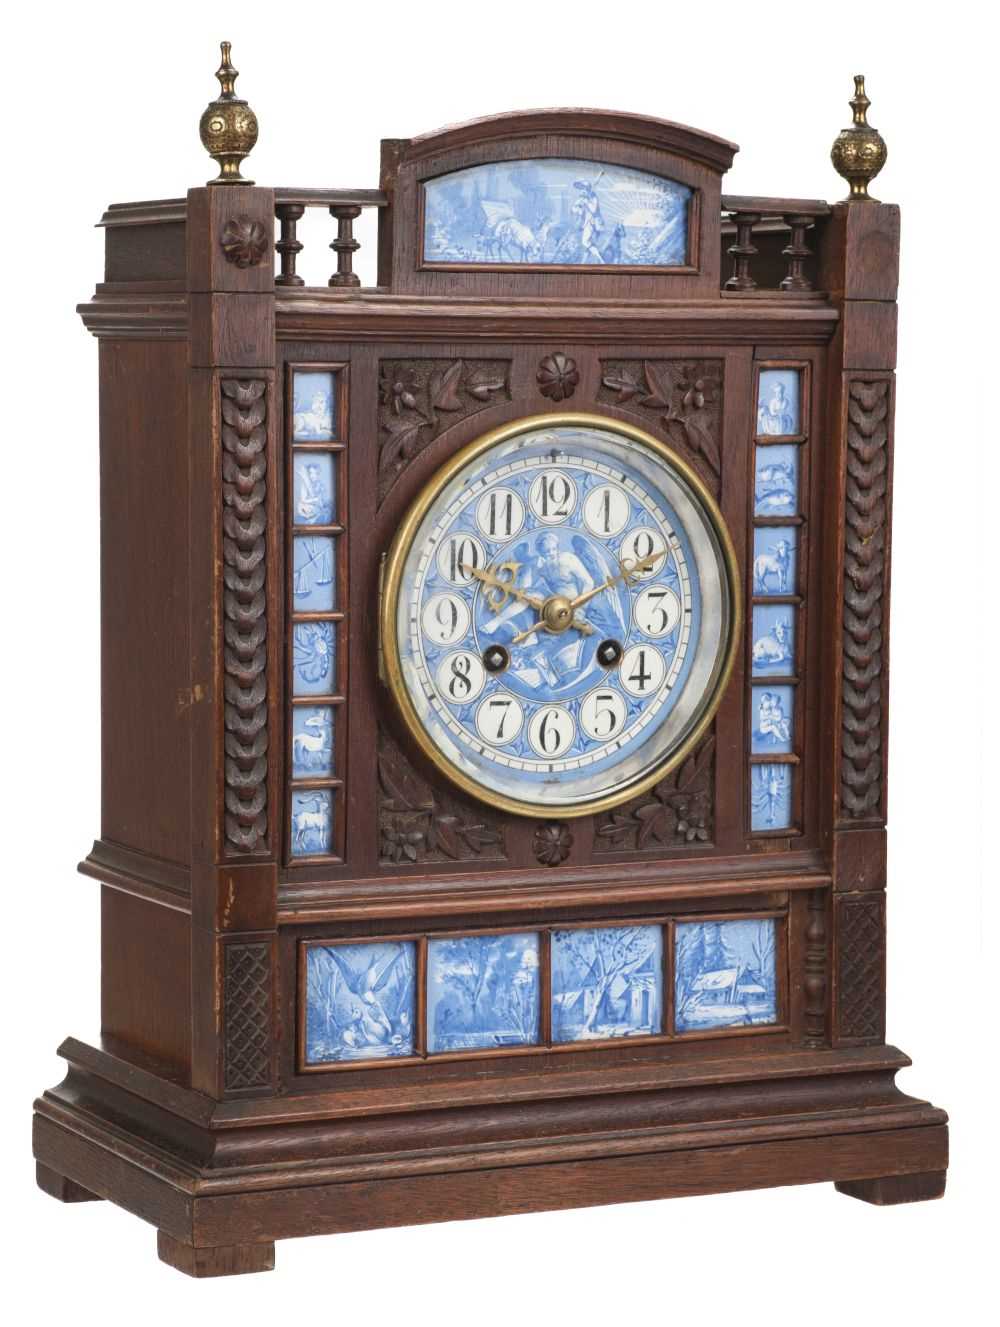 Lot 417 - Clock. A Victorian Aesthetic period mantel clock in the style of Lewis Foreman Day